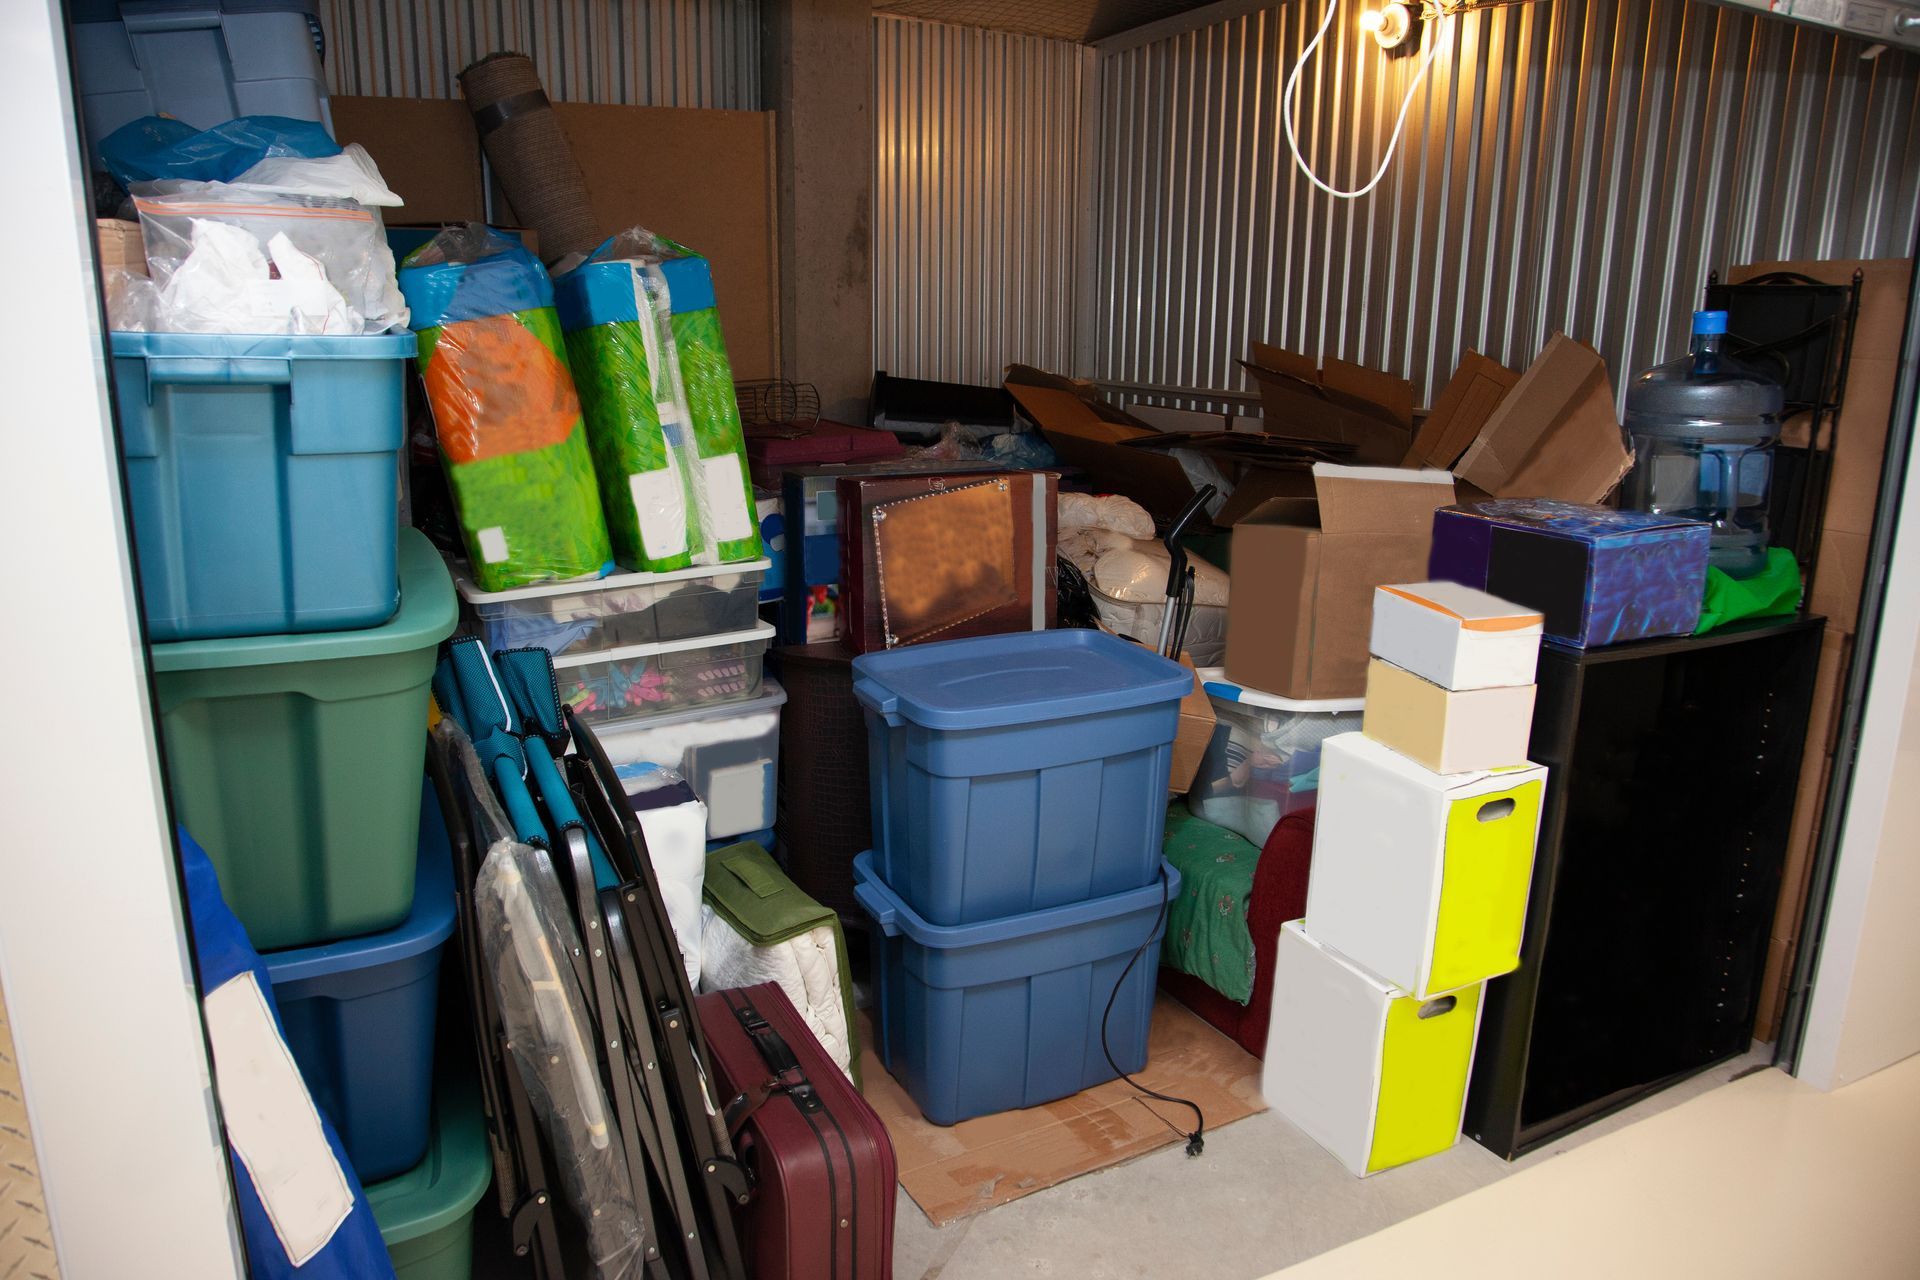 Household items you can put in a storage facility during a move.